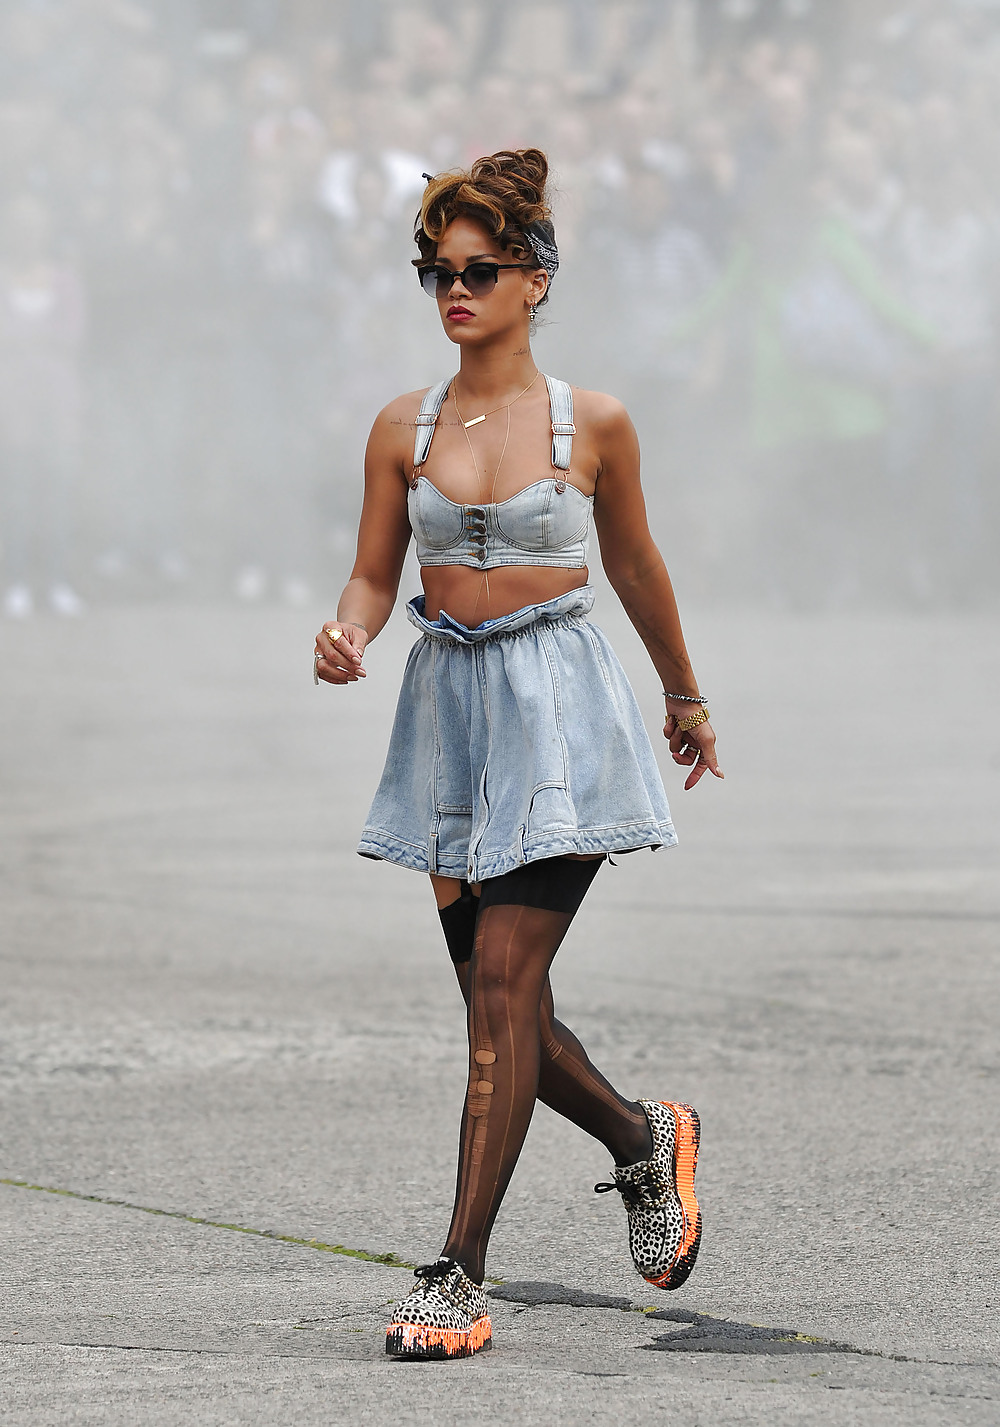 Rihanna filming the music video We Found Love in Ireland #8290534